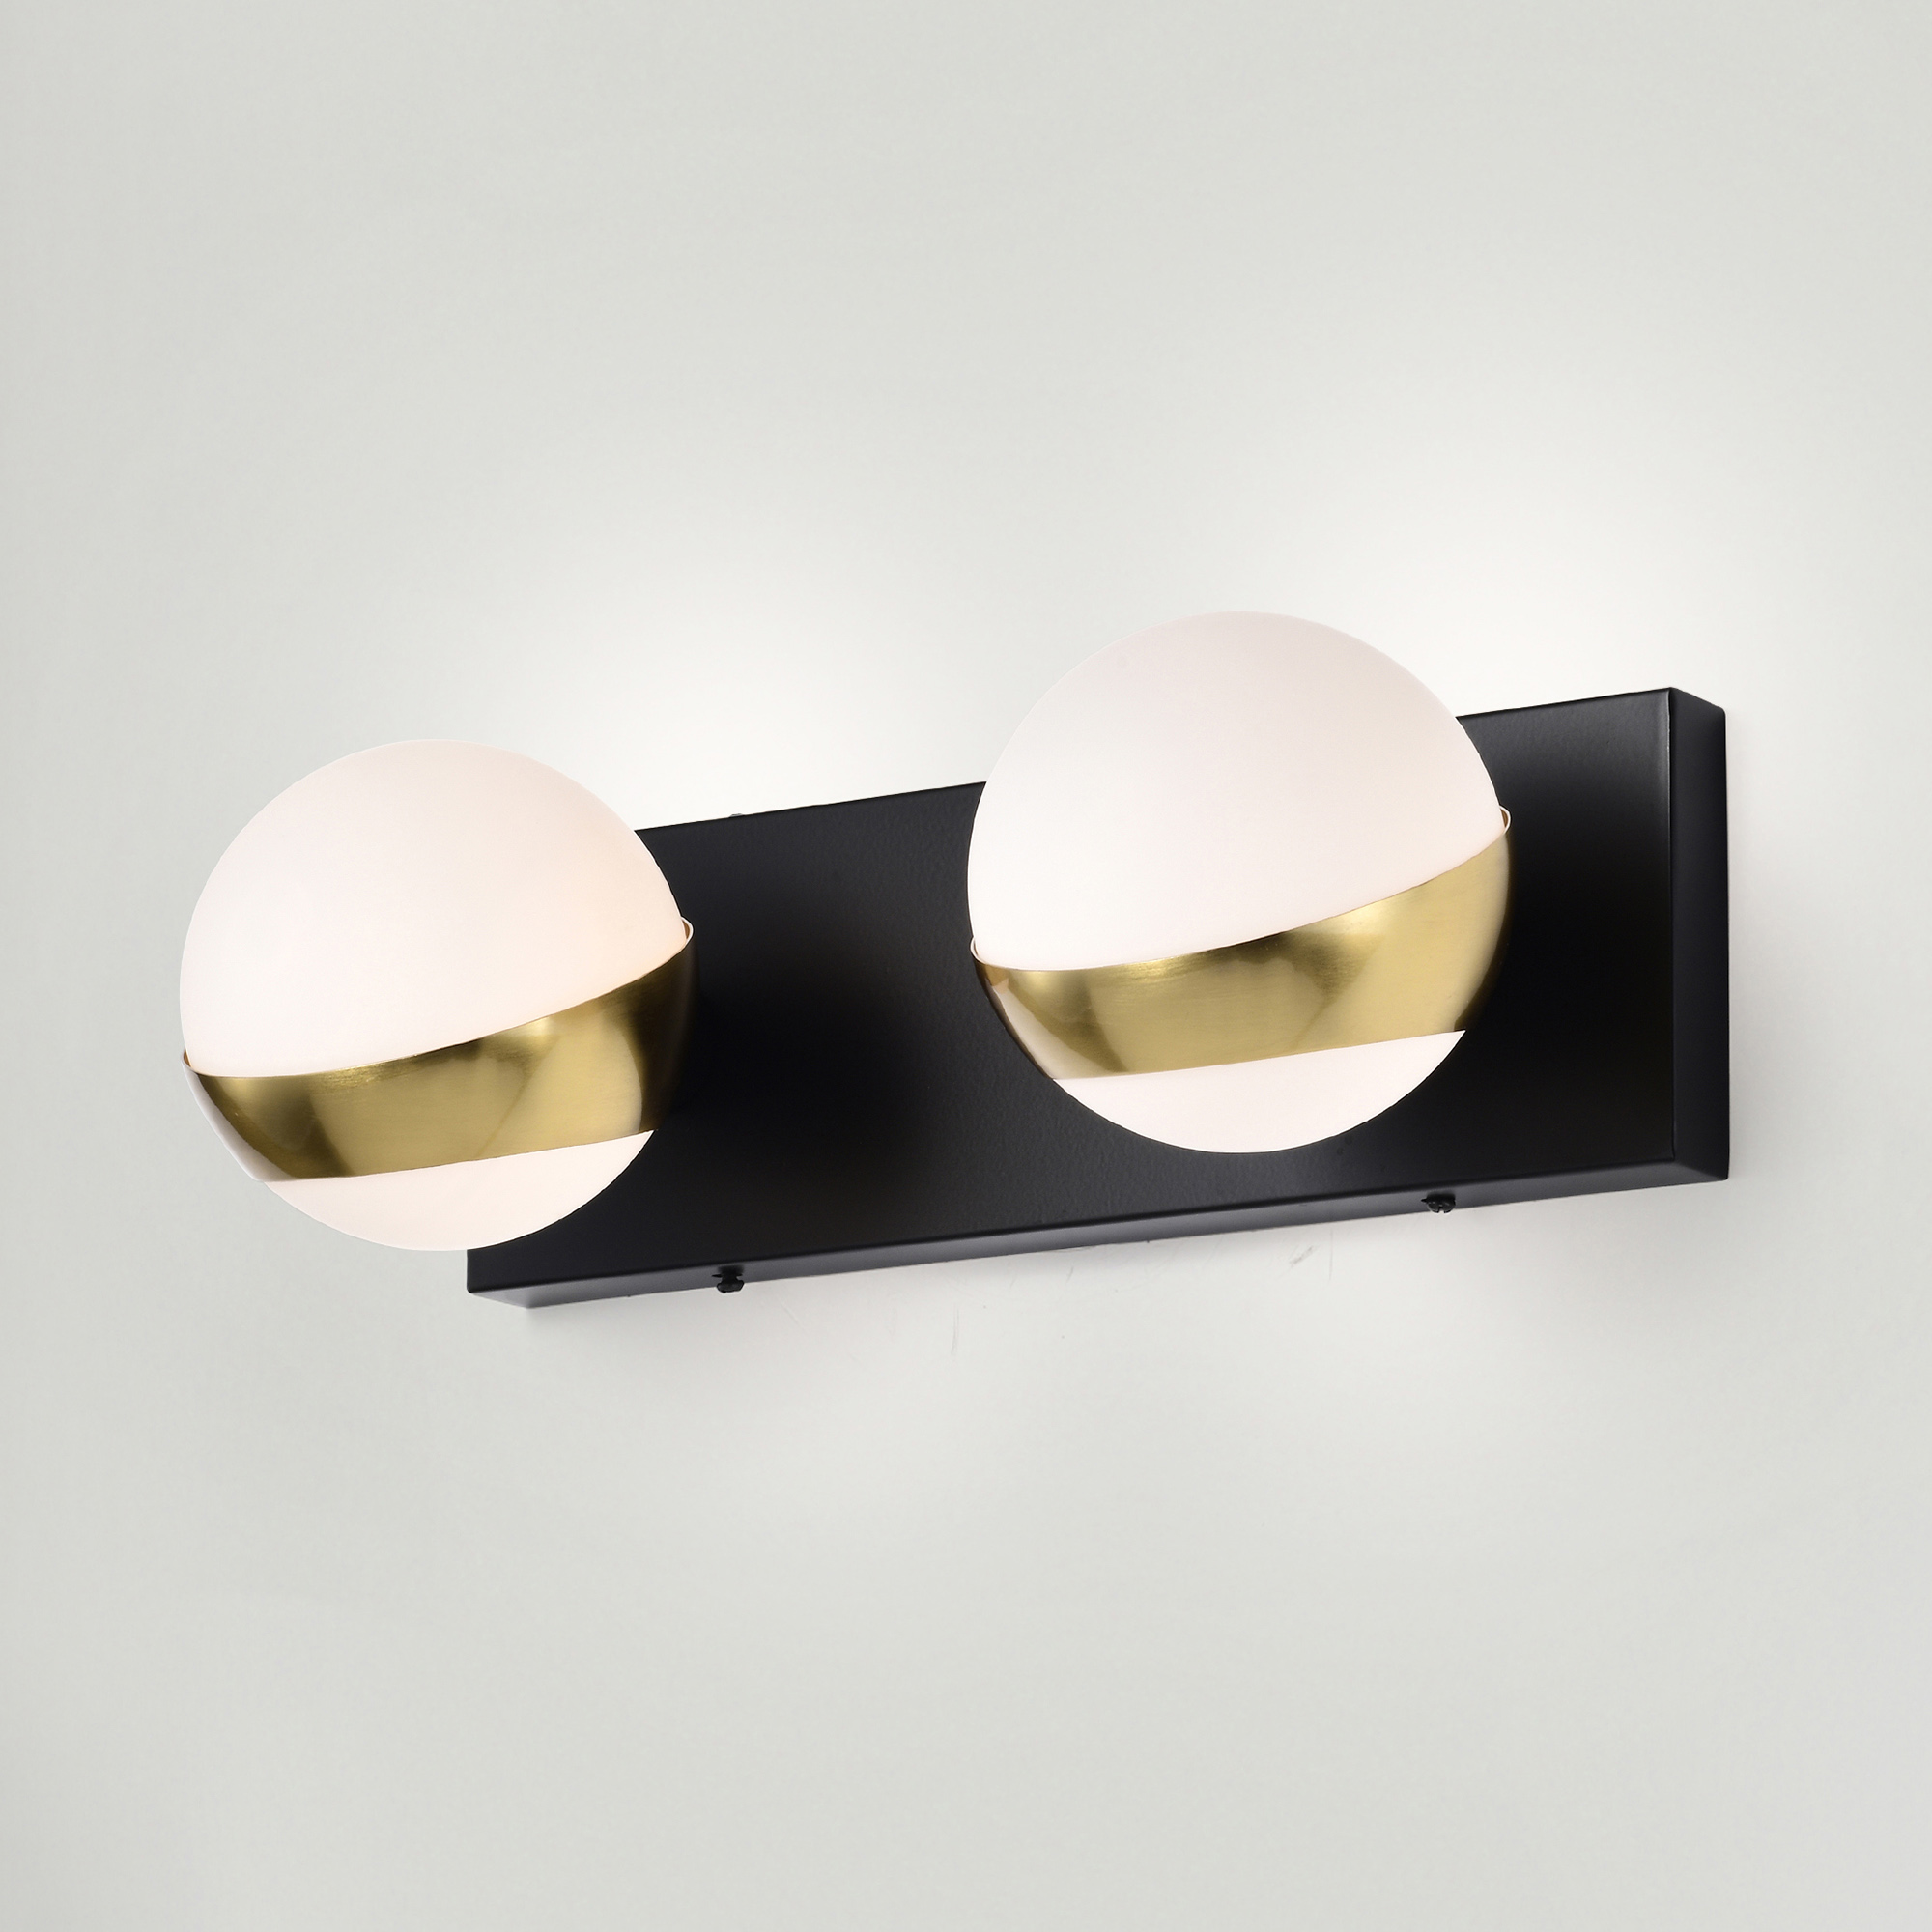 Duo 14 in. 2-Light Indoor Matte Black and Matte Gold Finish Wall Sconce with Light Kit